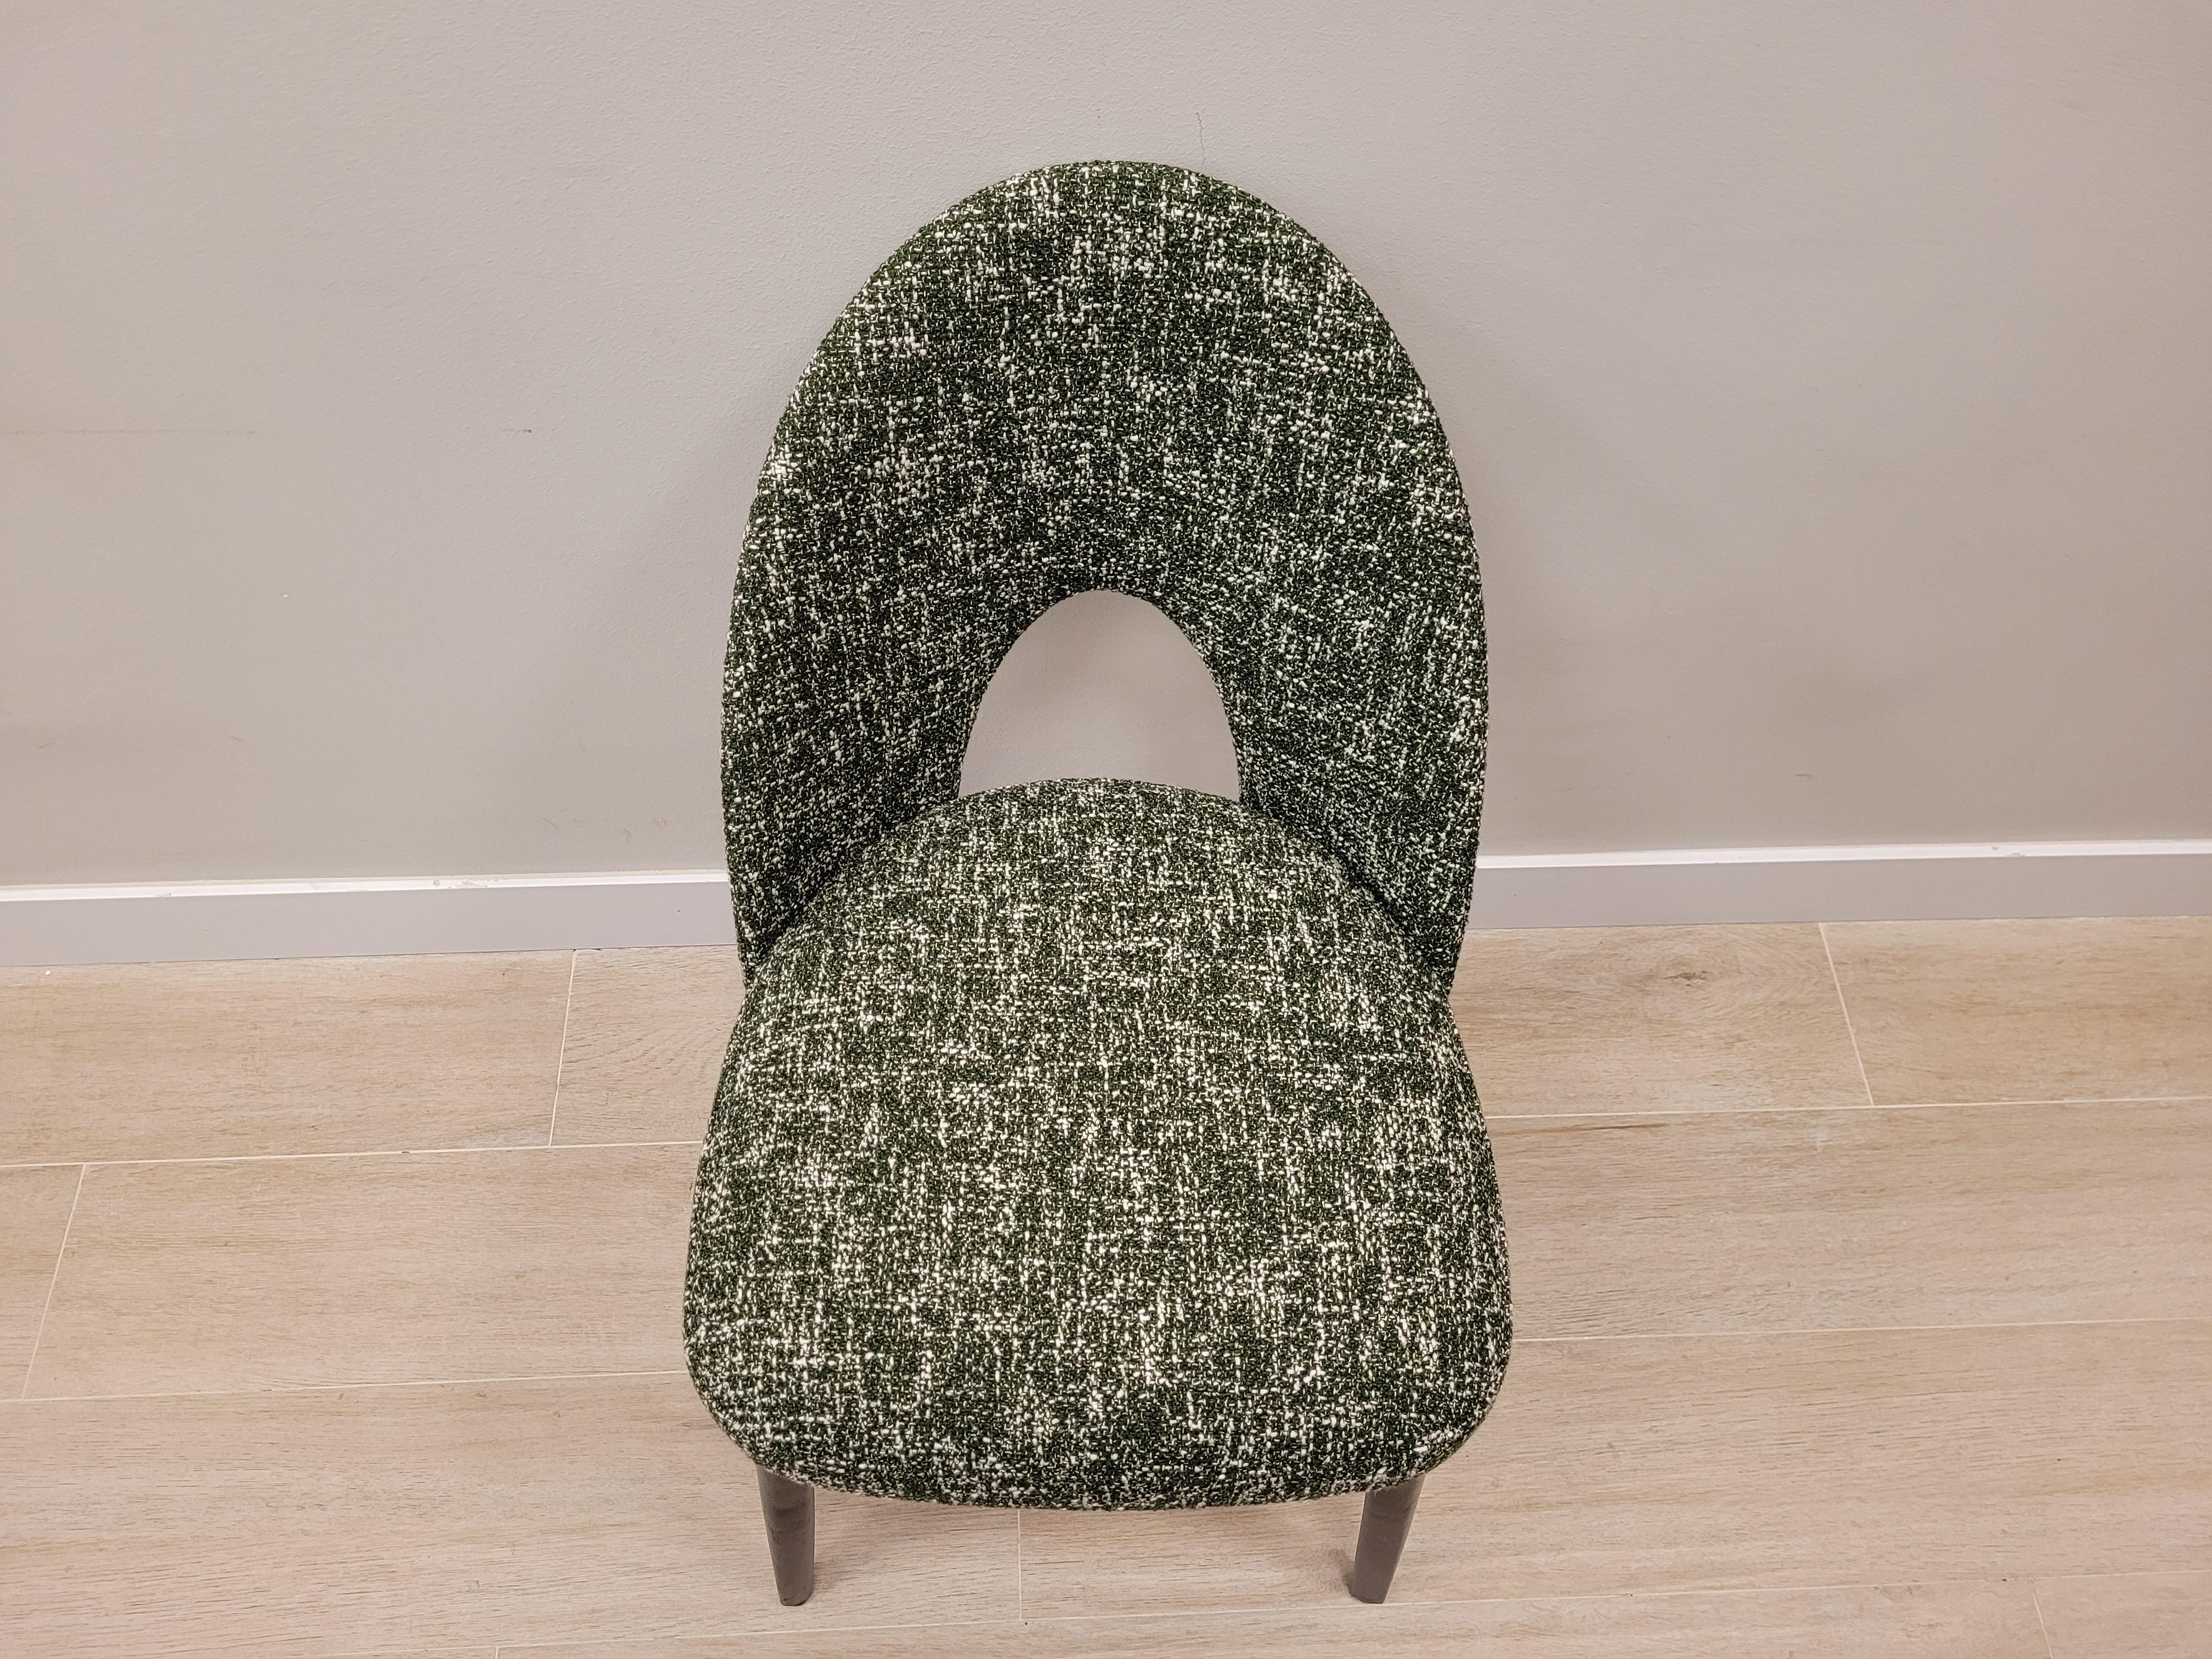 Roche Bobois Set of 4 Green Chairs, France 1